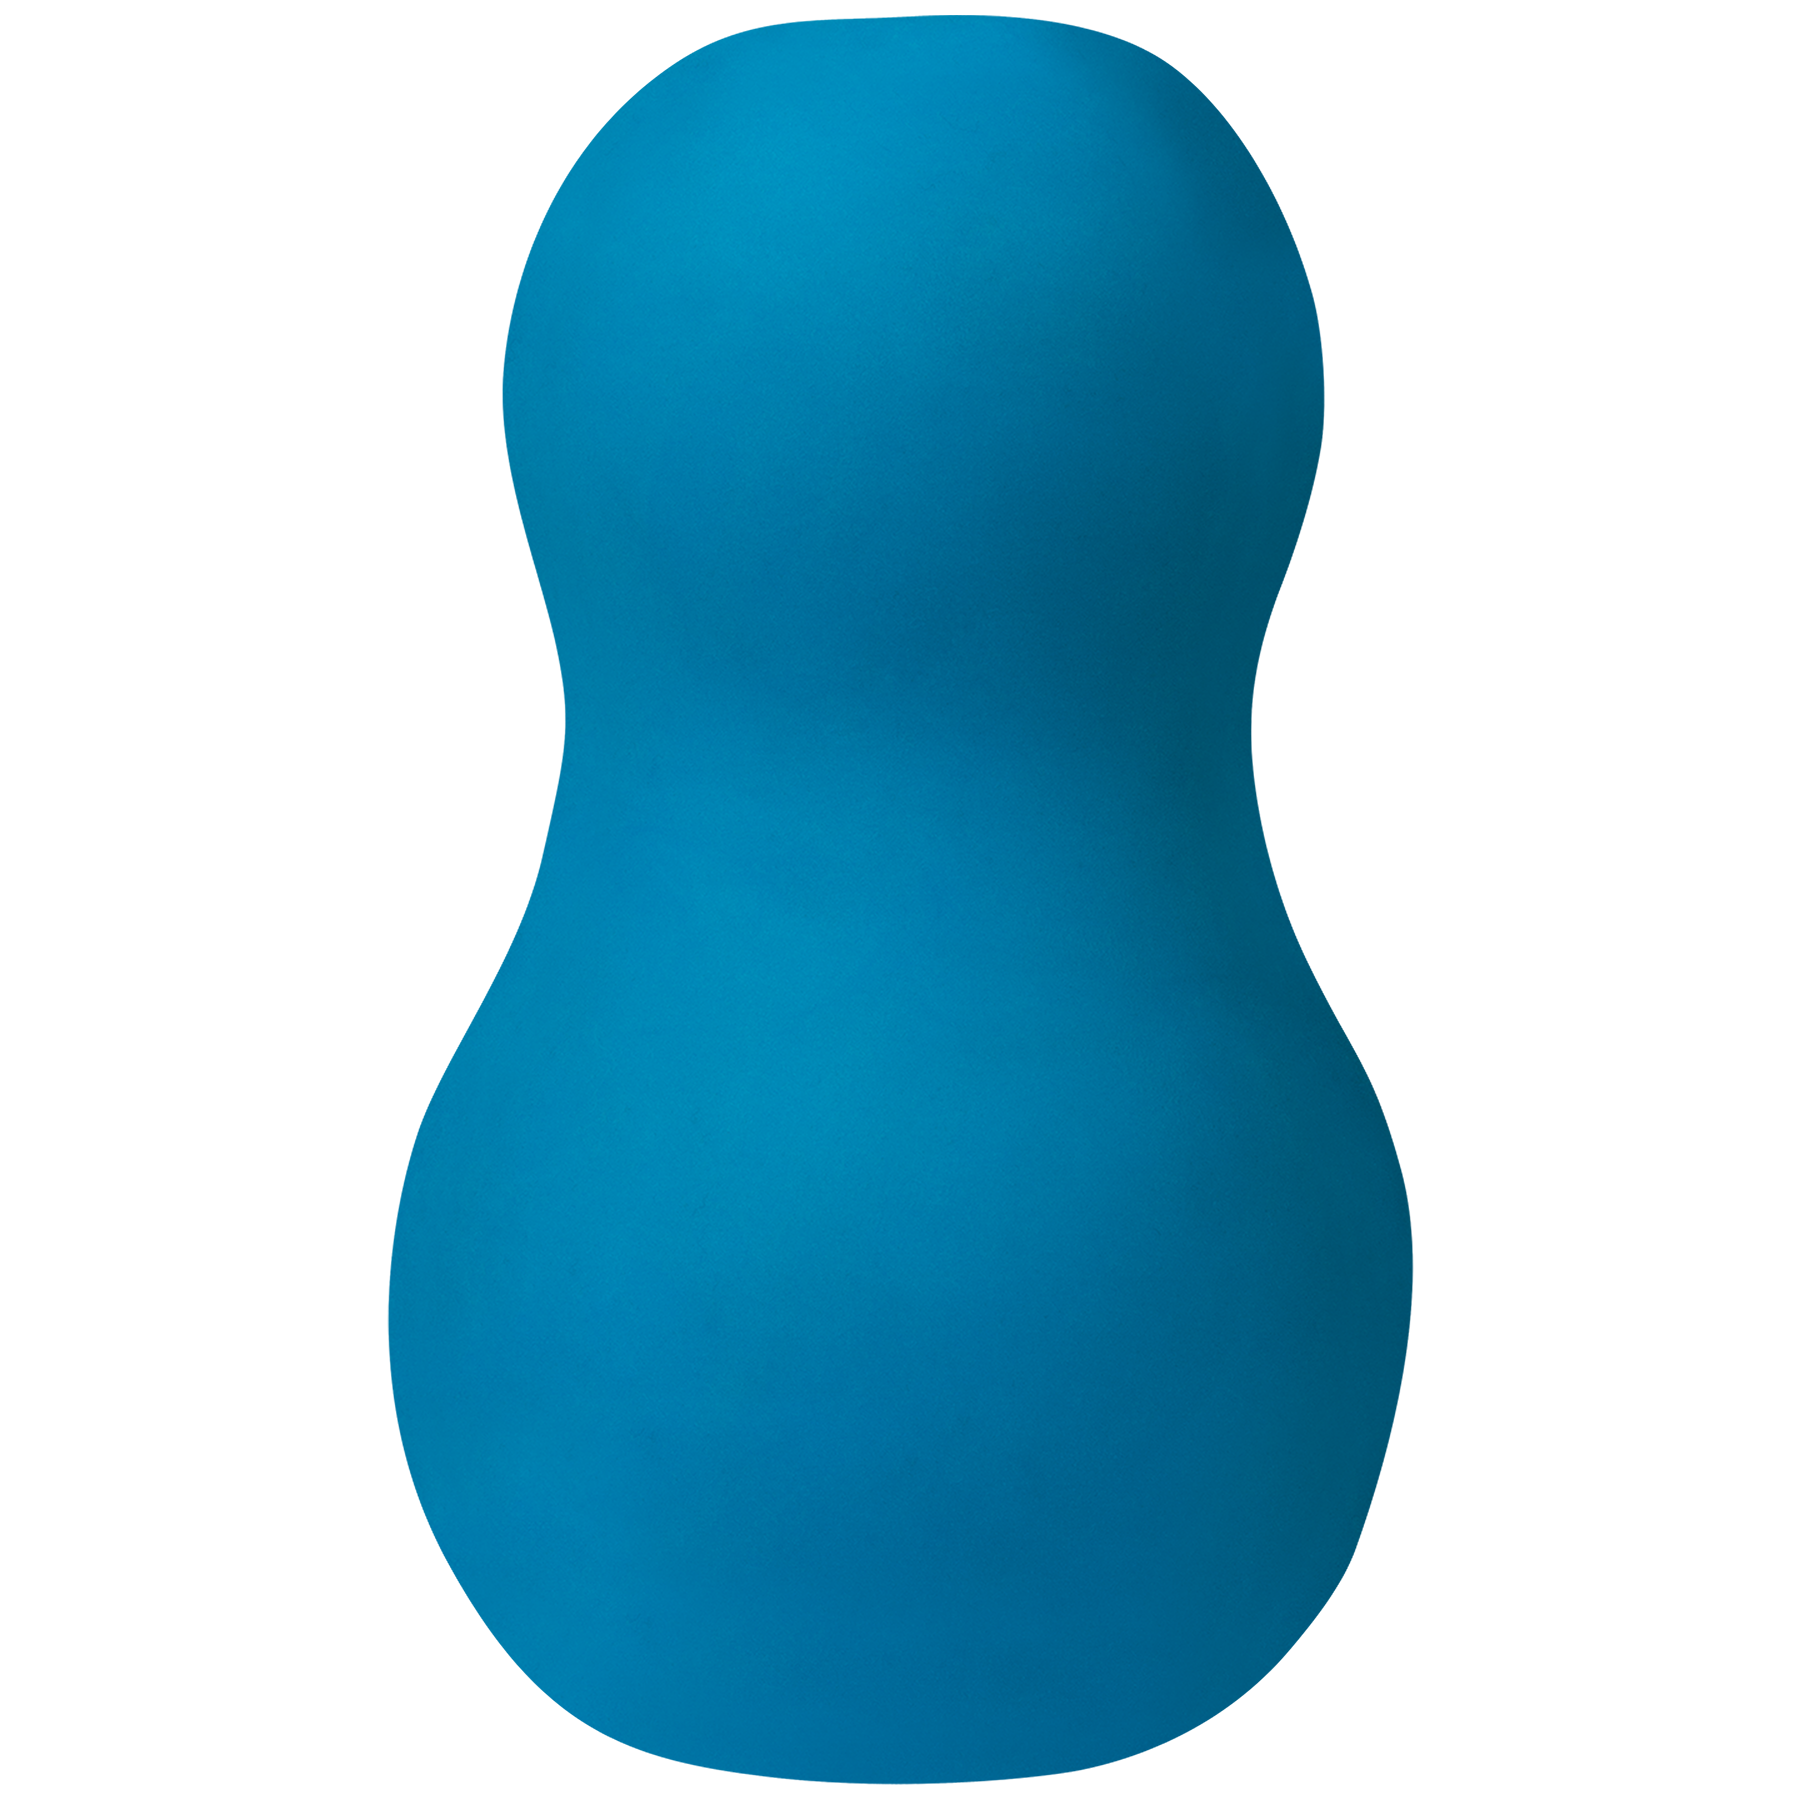 Mood Exciter Stroker - Blue - Thorn & Feather Sex Toy Canada